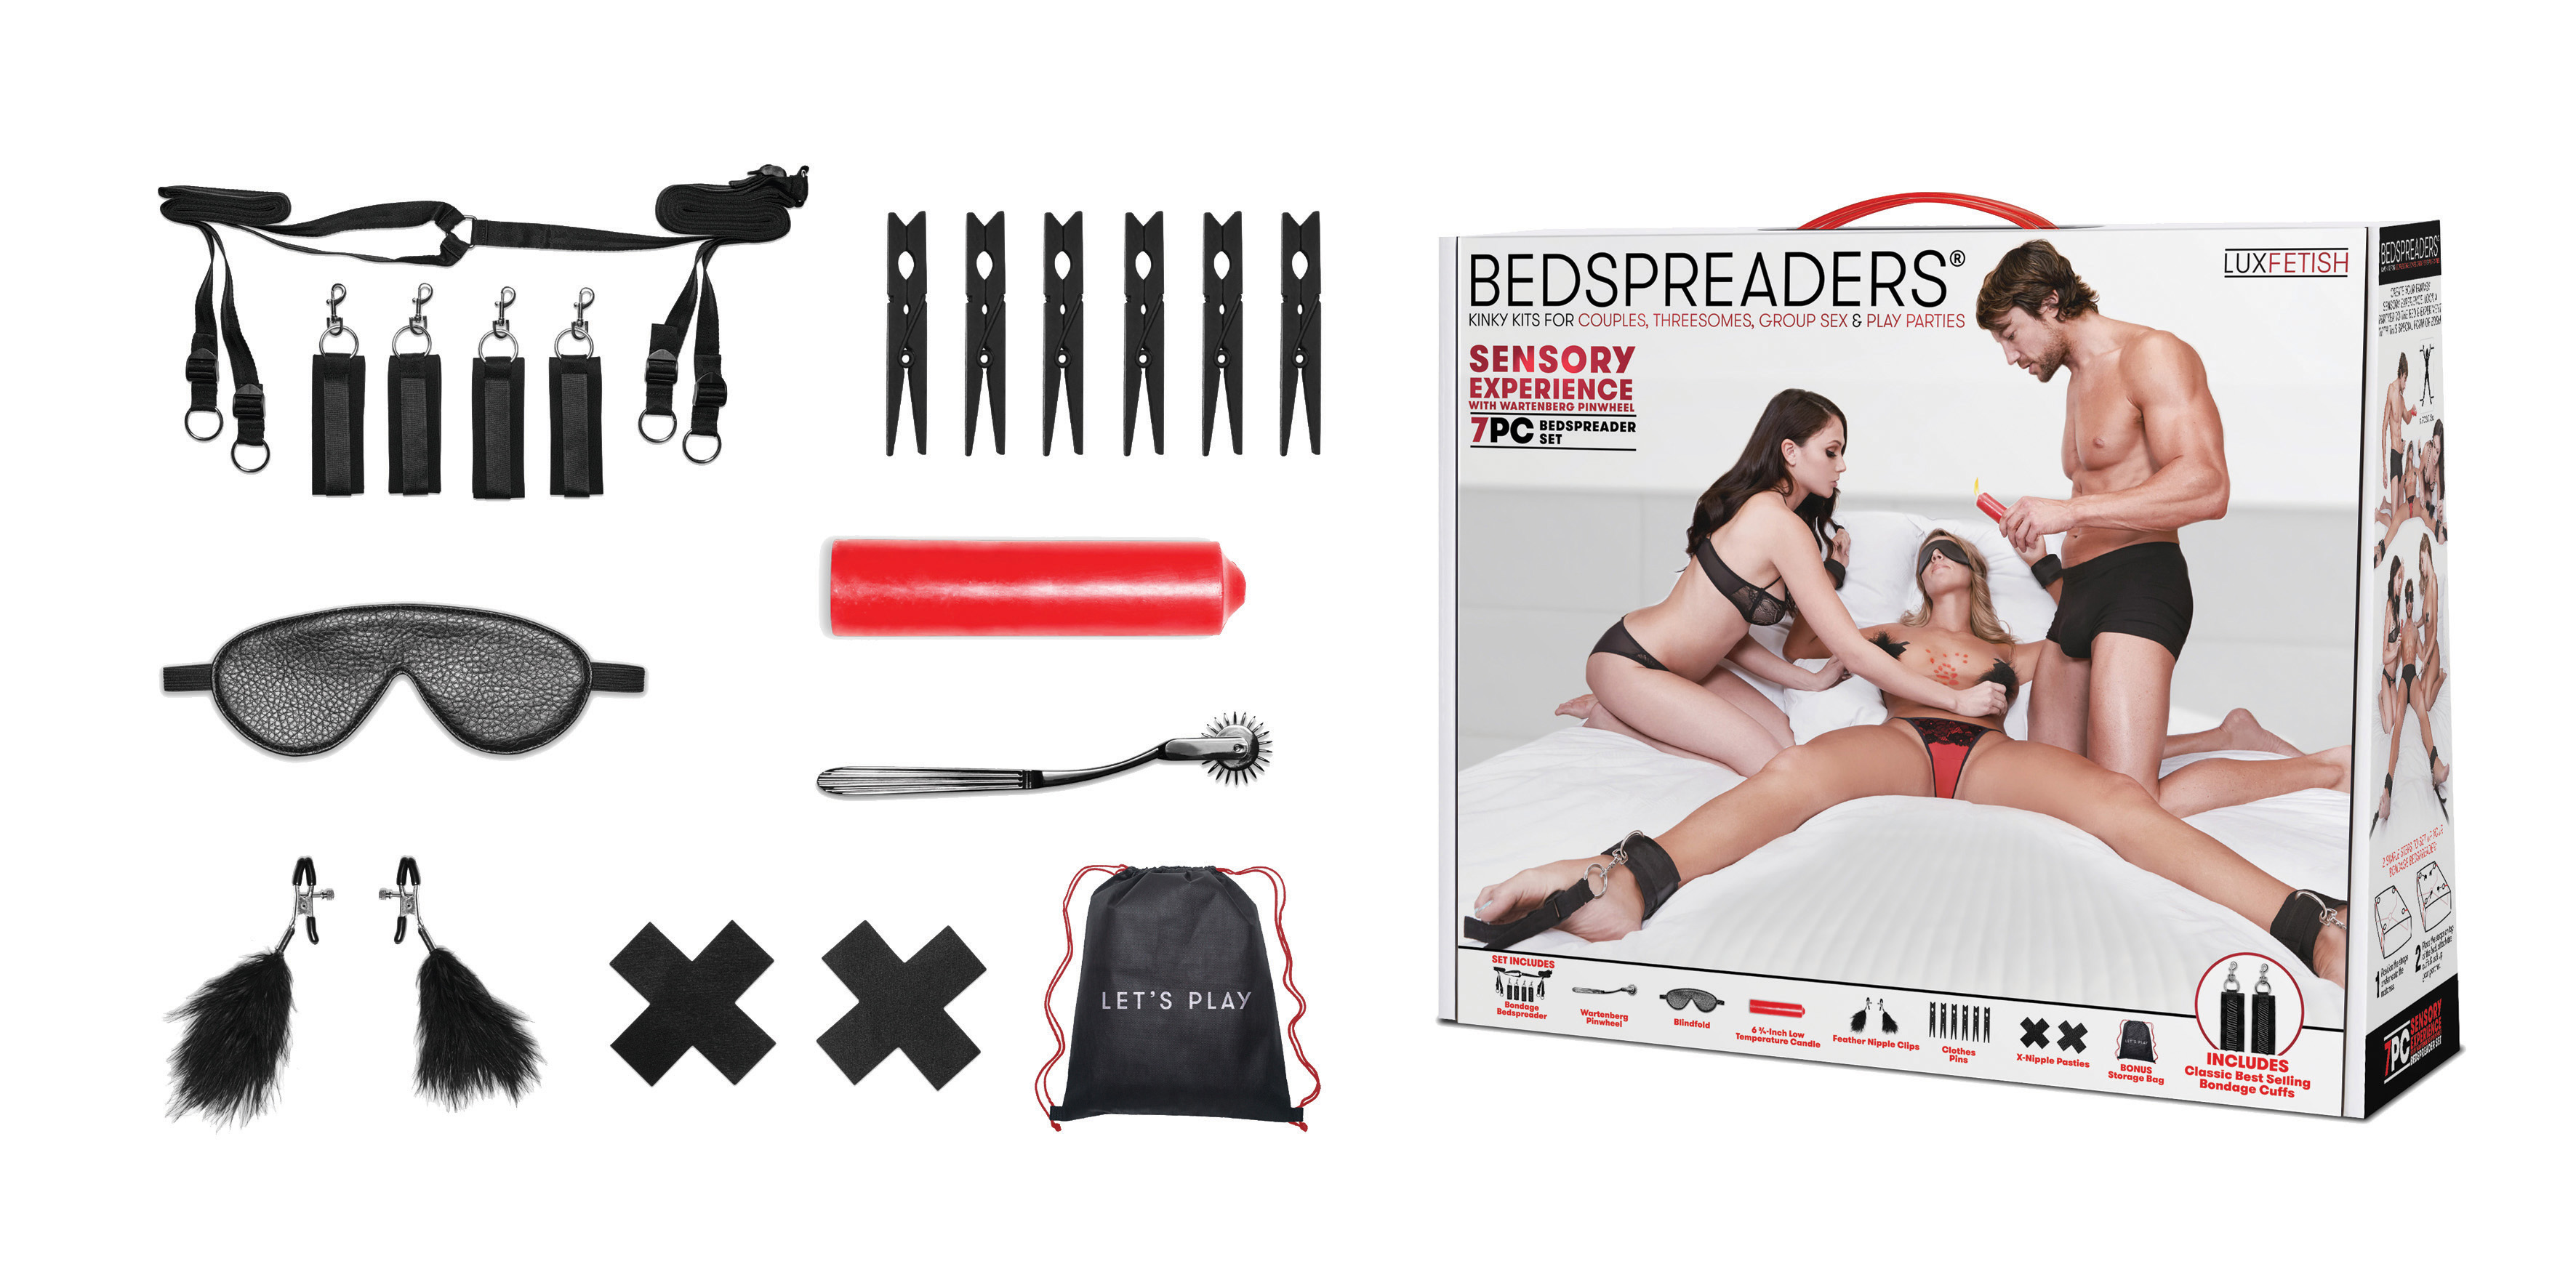 LUX FETISH Bedspreaders Sensory Experience (7pc)